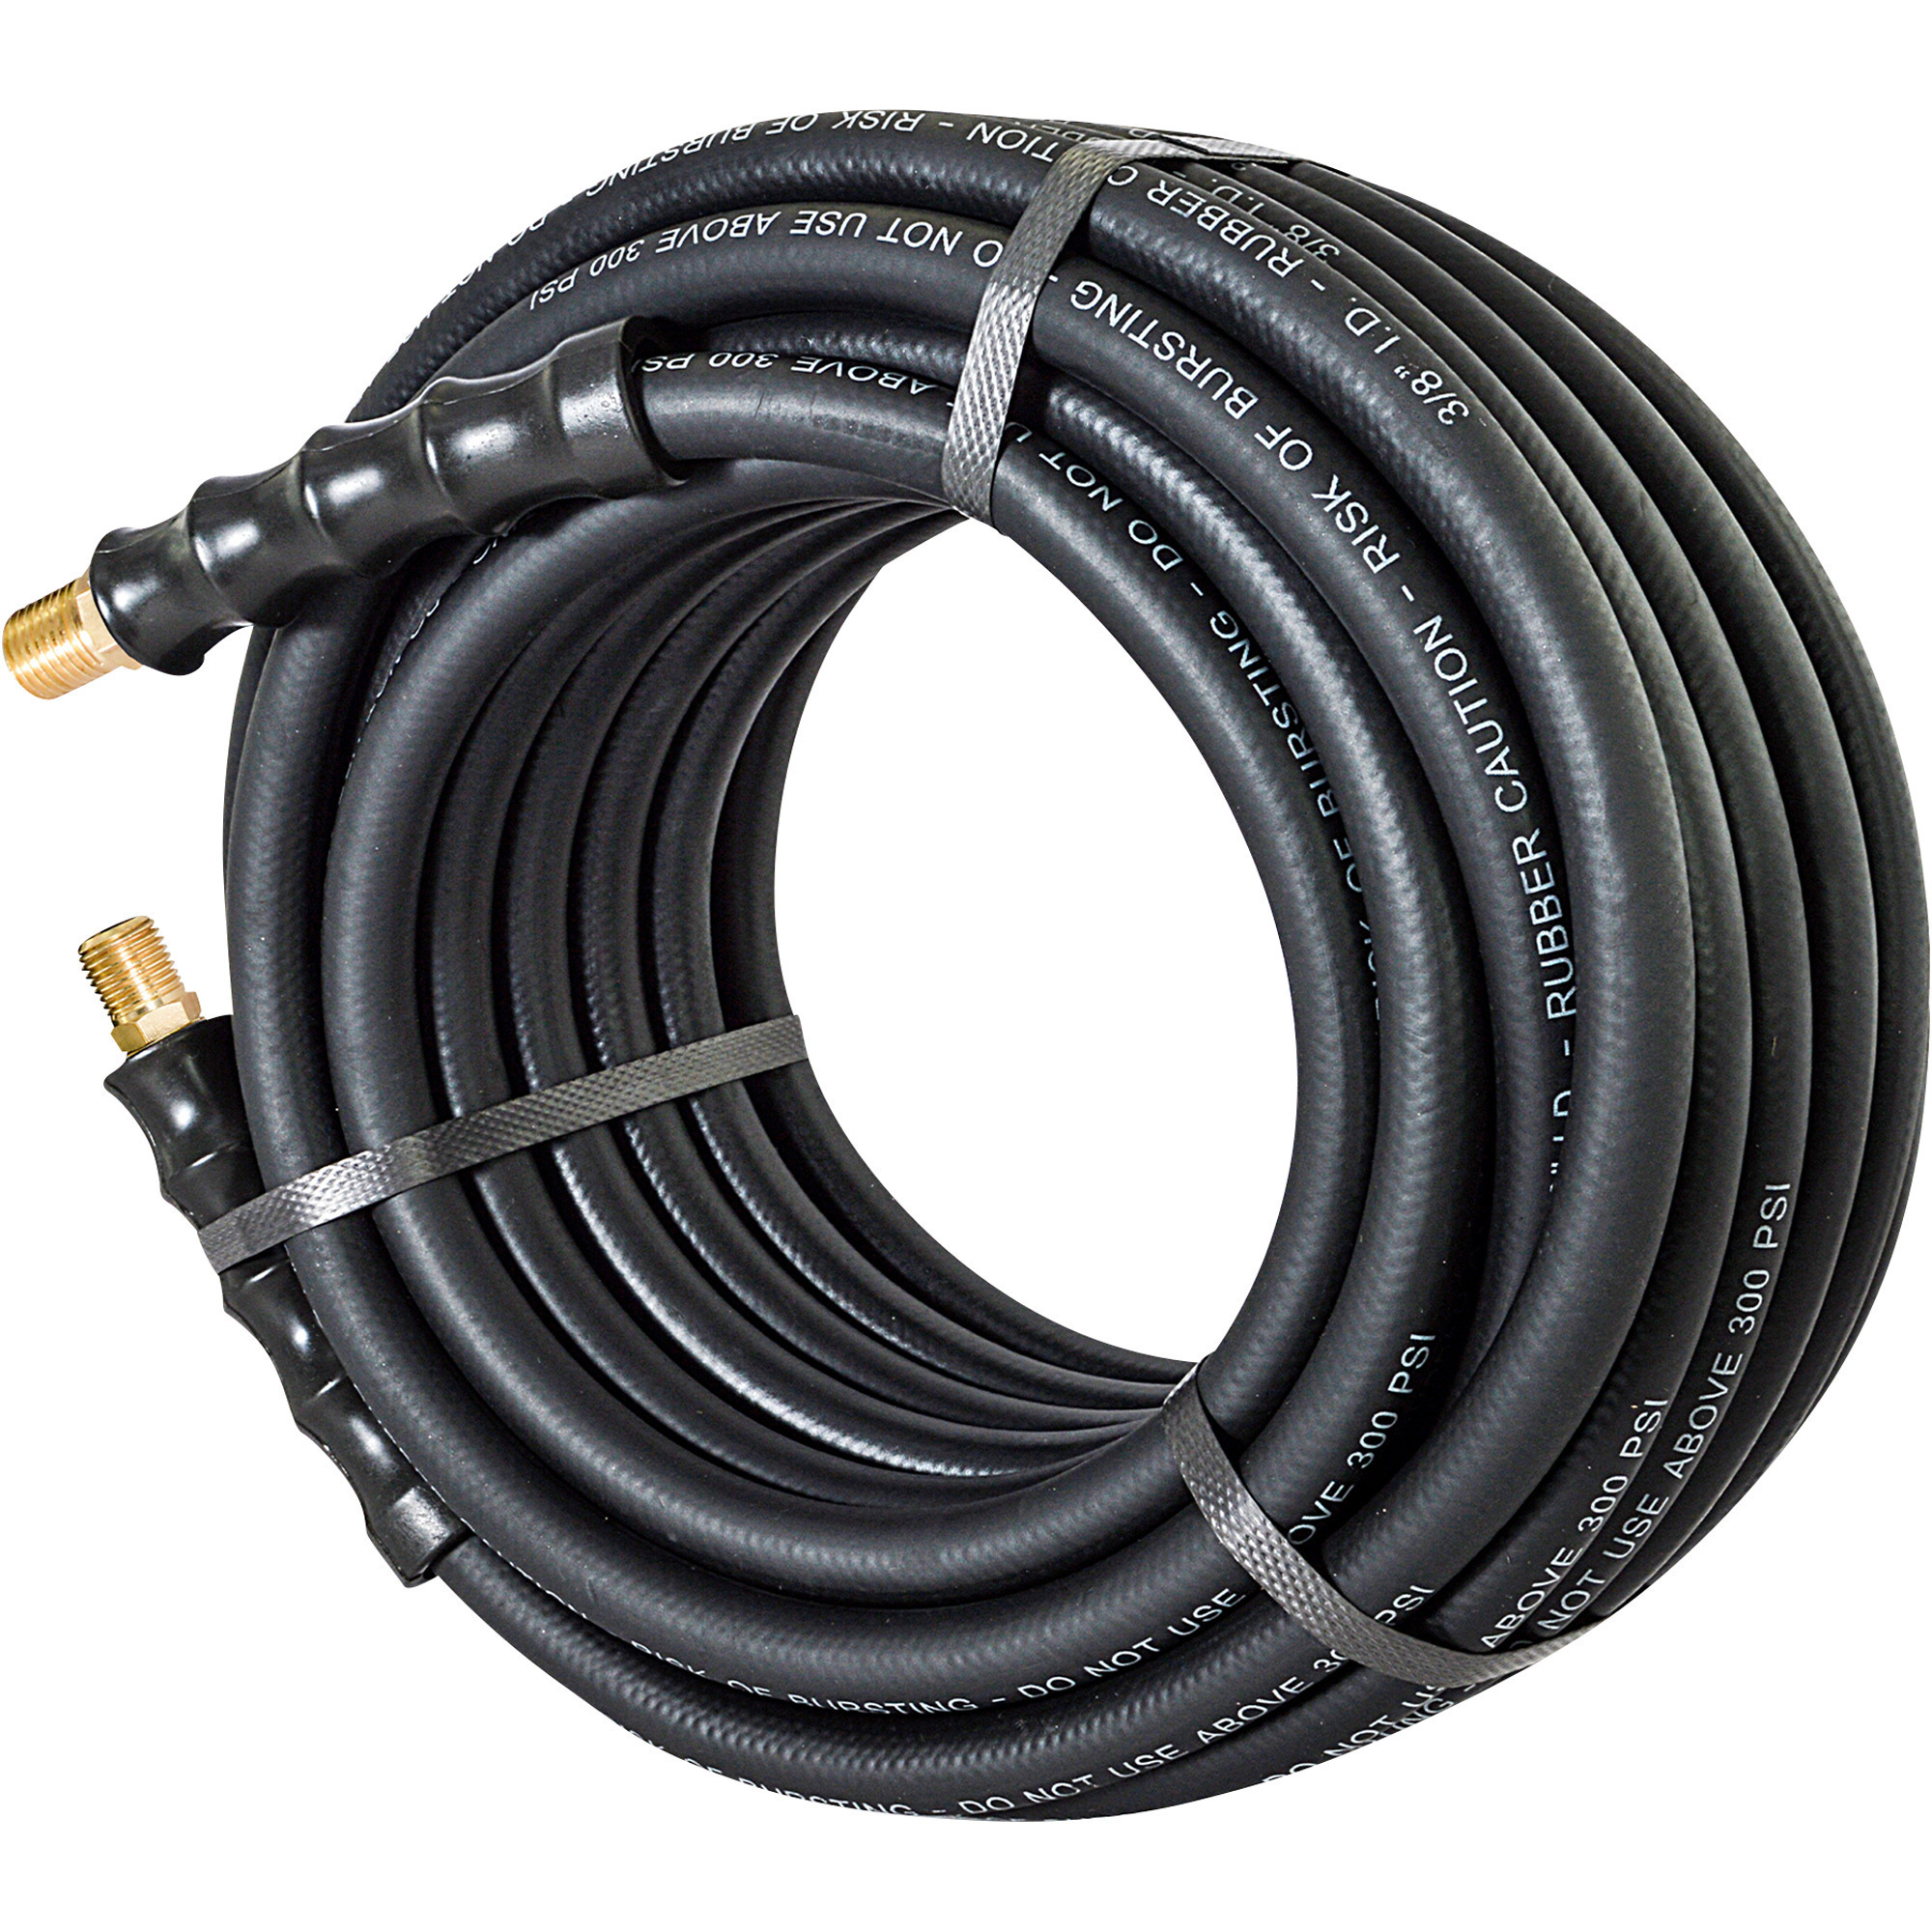 PSI, Klutch Air 3/8in. Northern 300 x Model# 50ft., TLEX3850-NT | Hose, Rubber Tool